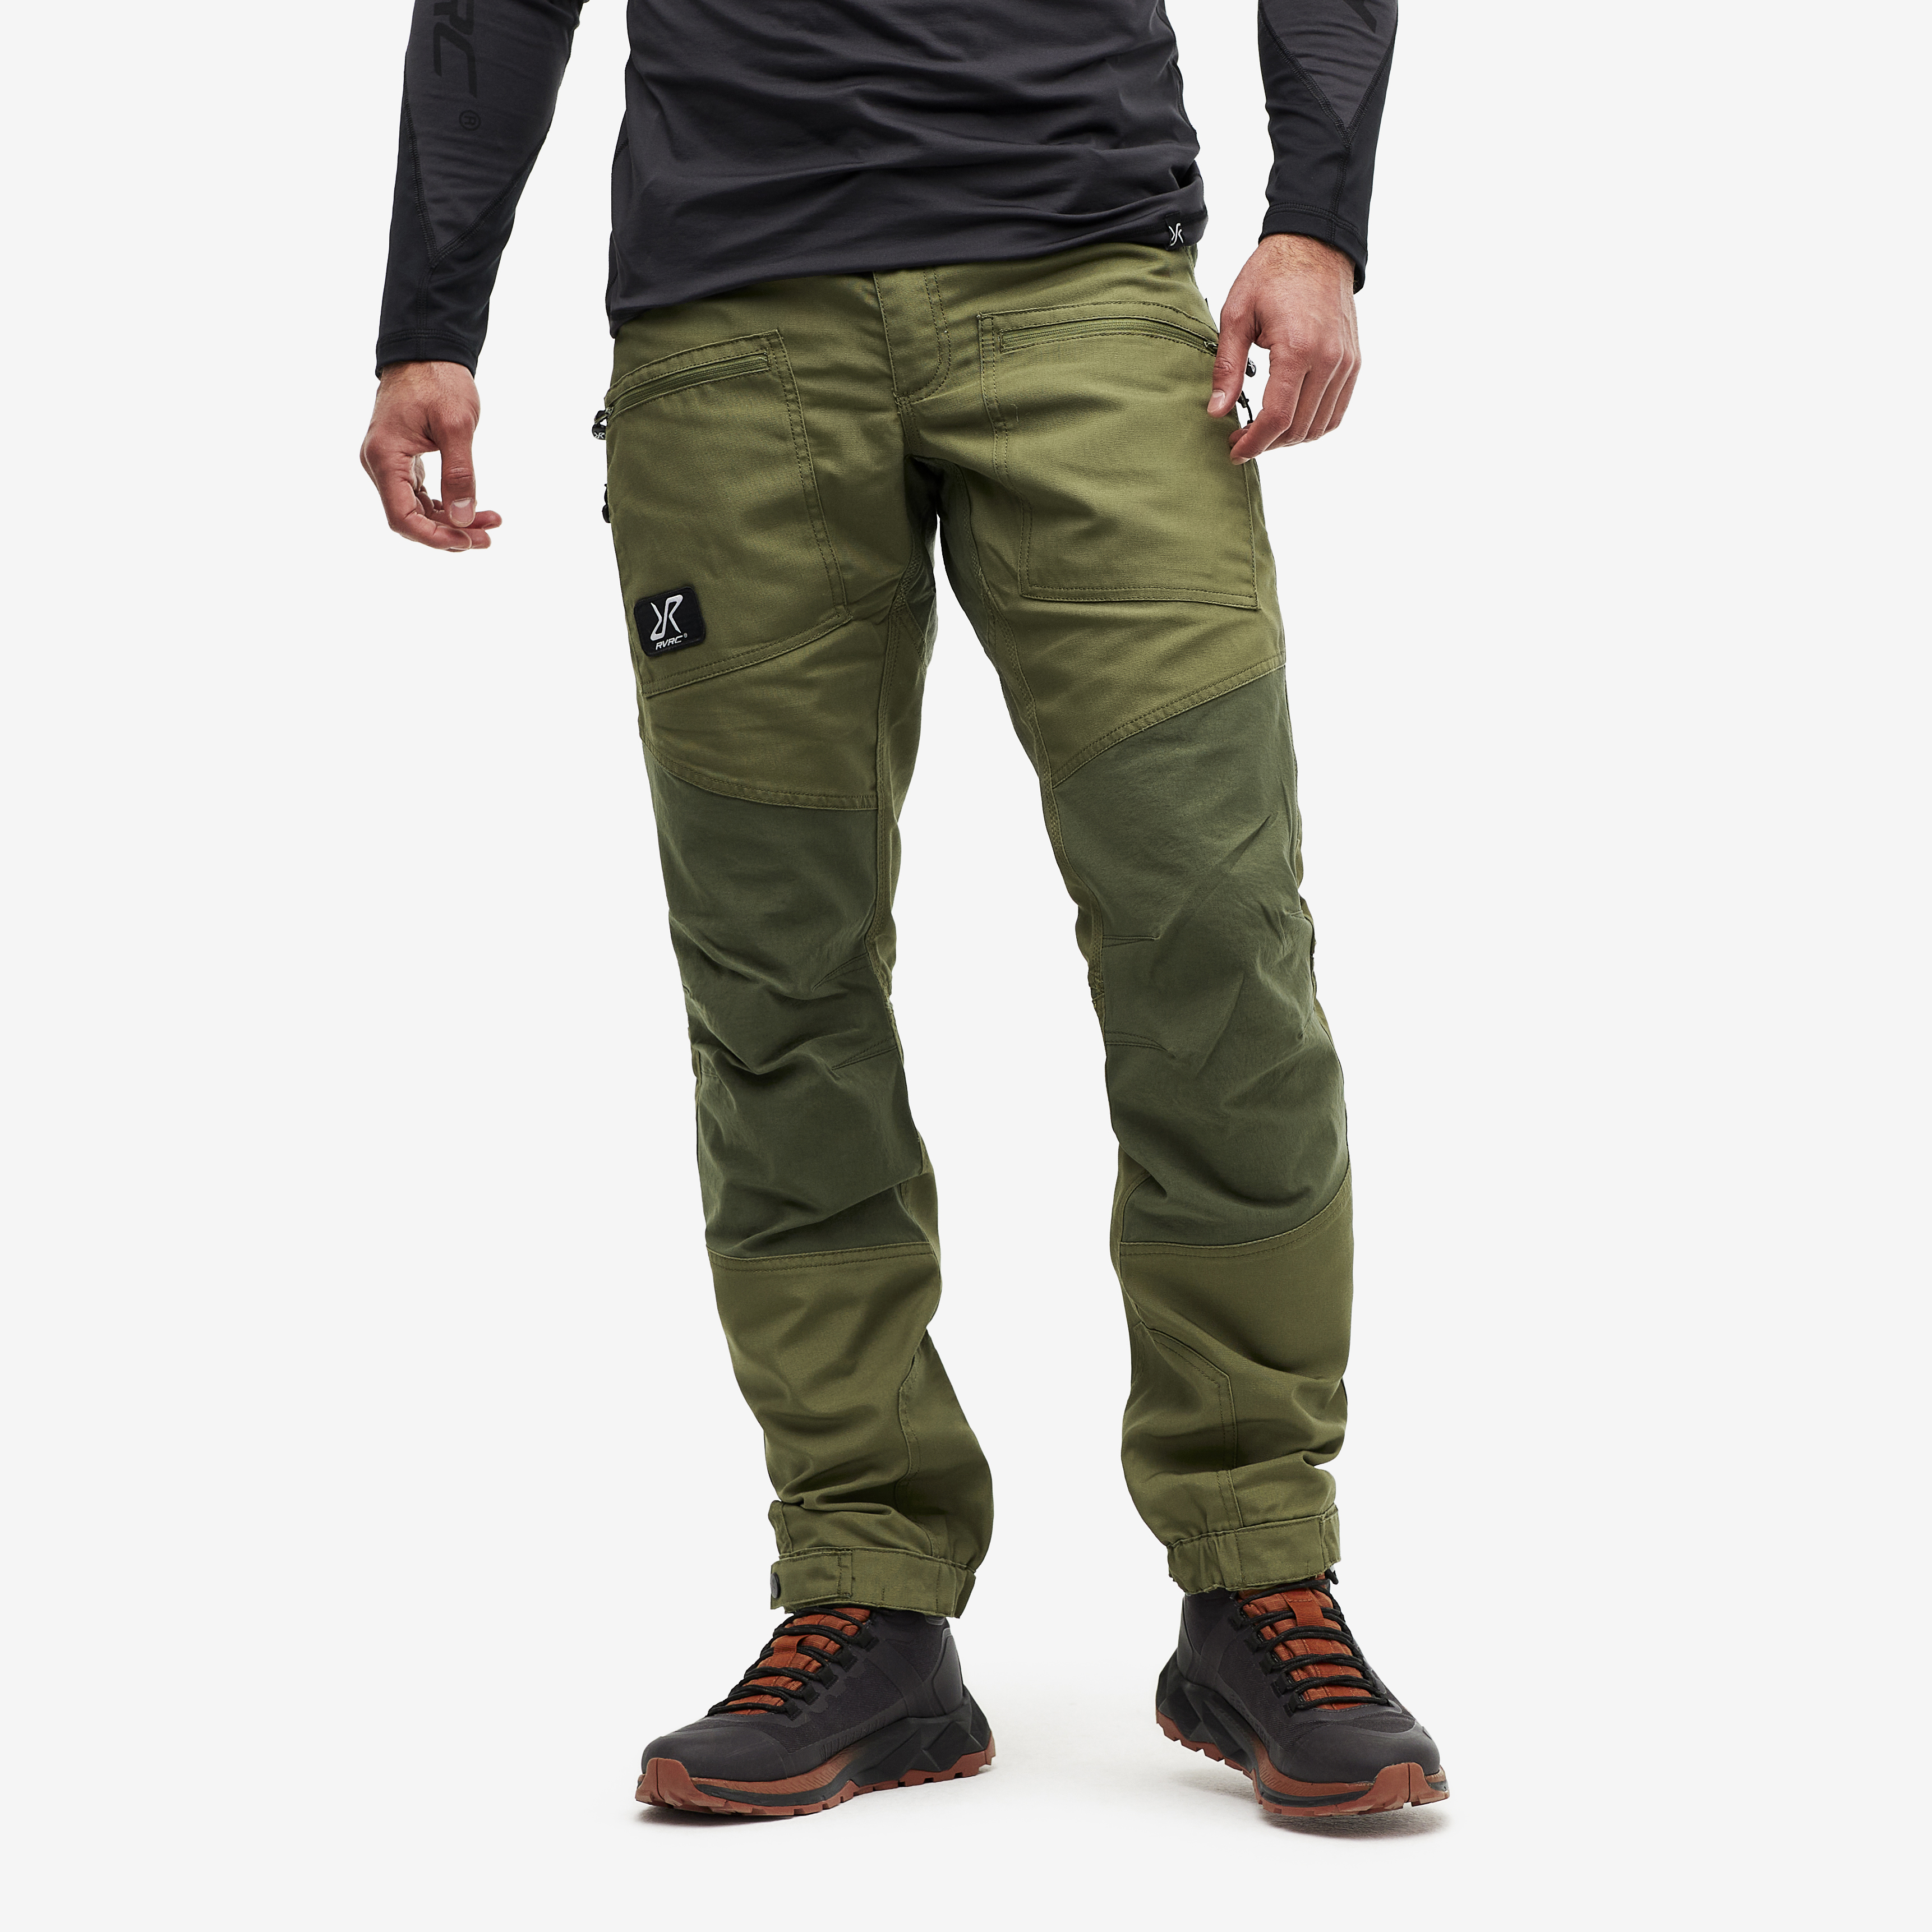 Nordwand Pro Pants Burnt Olive Hombres